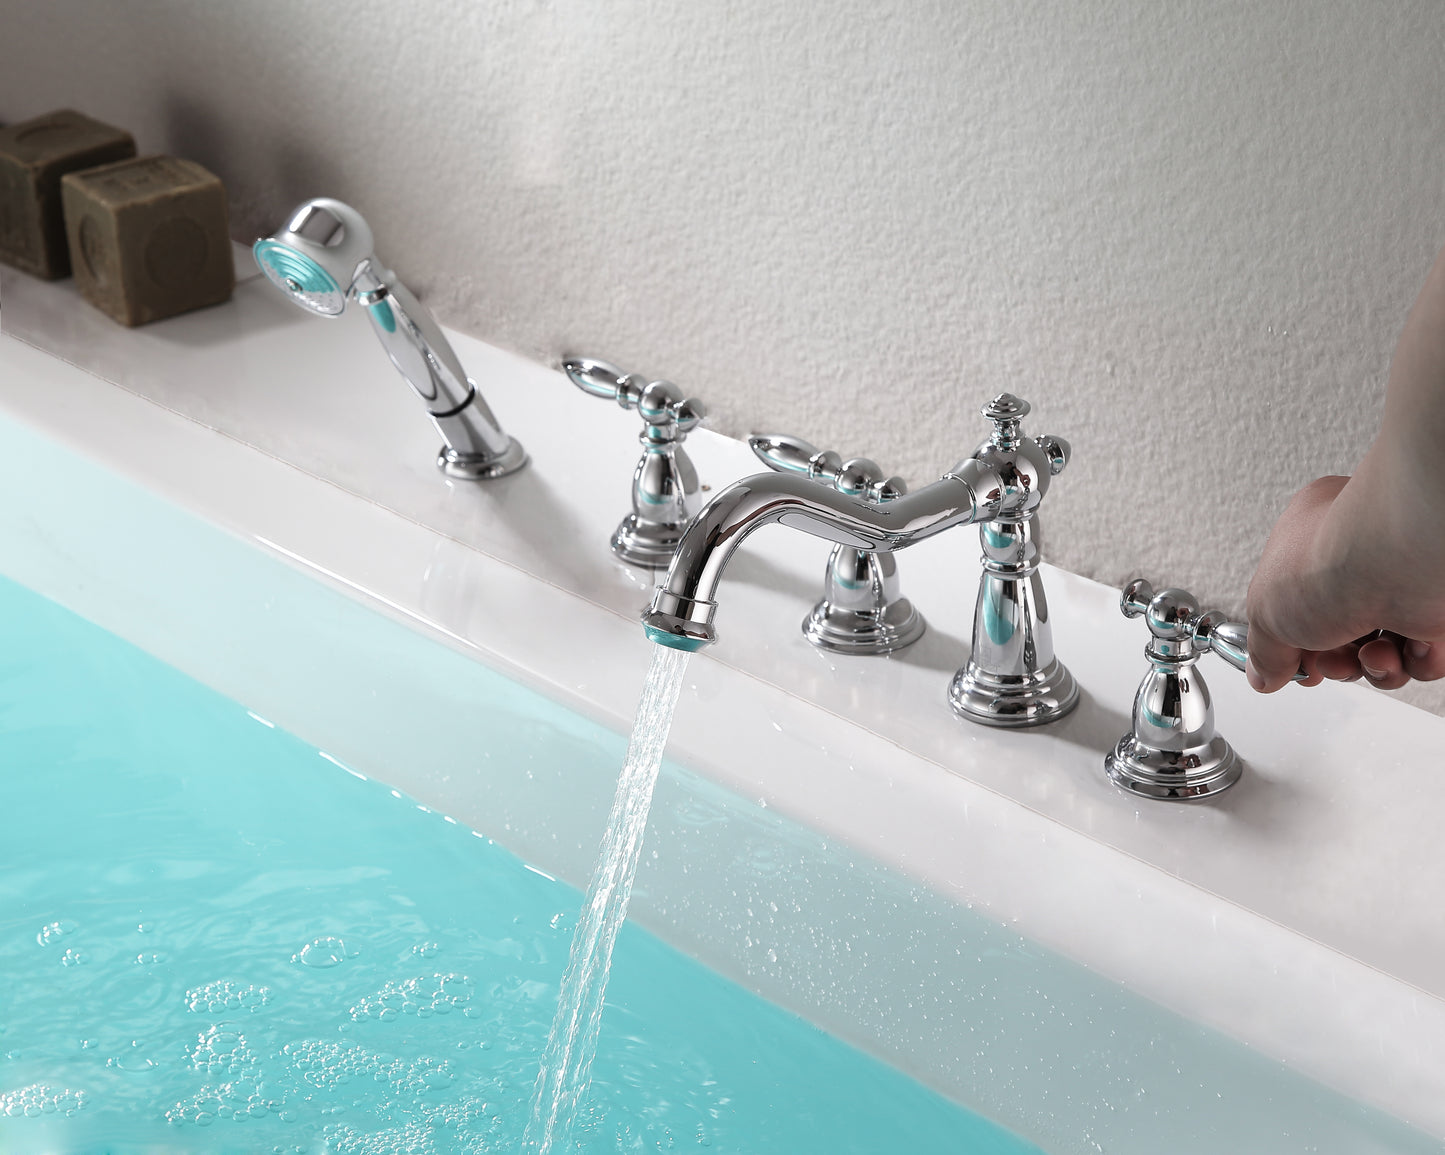 Patriarch 2-Handle Deck-Mount Roman Tub Faucet with Handheld Sprayer